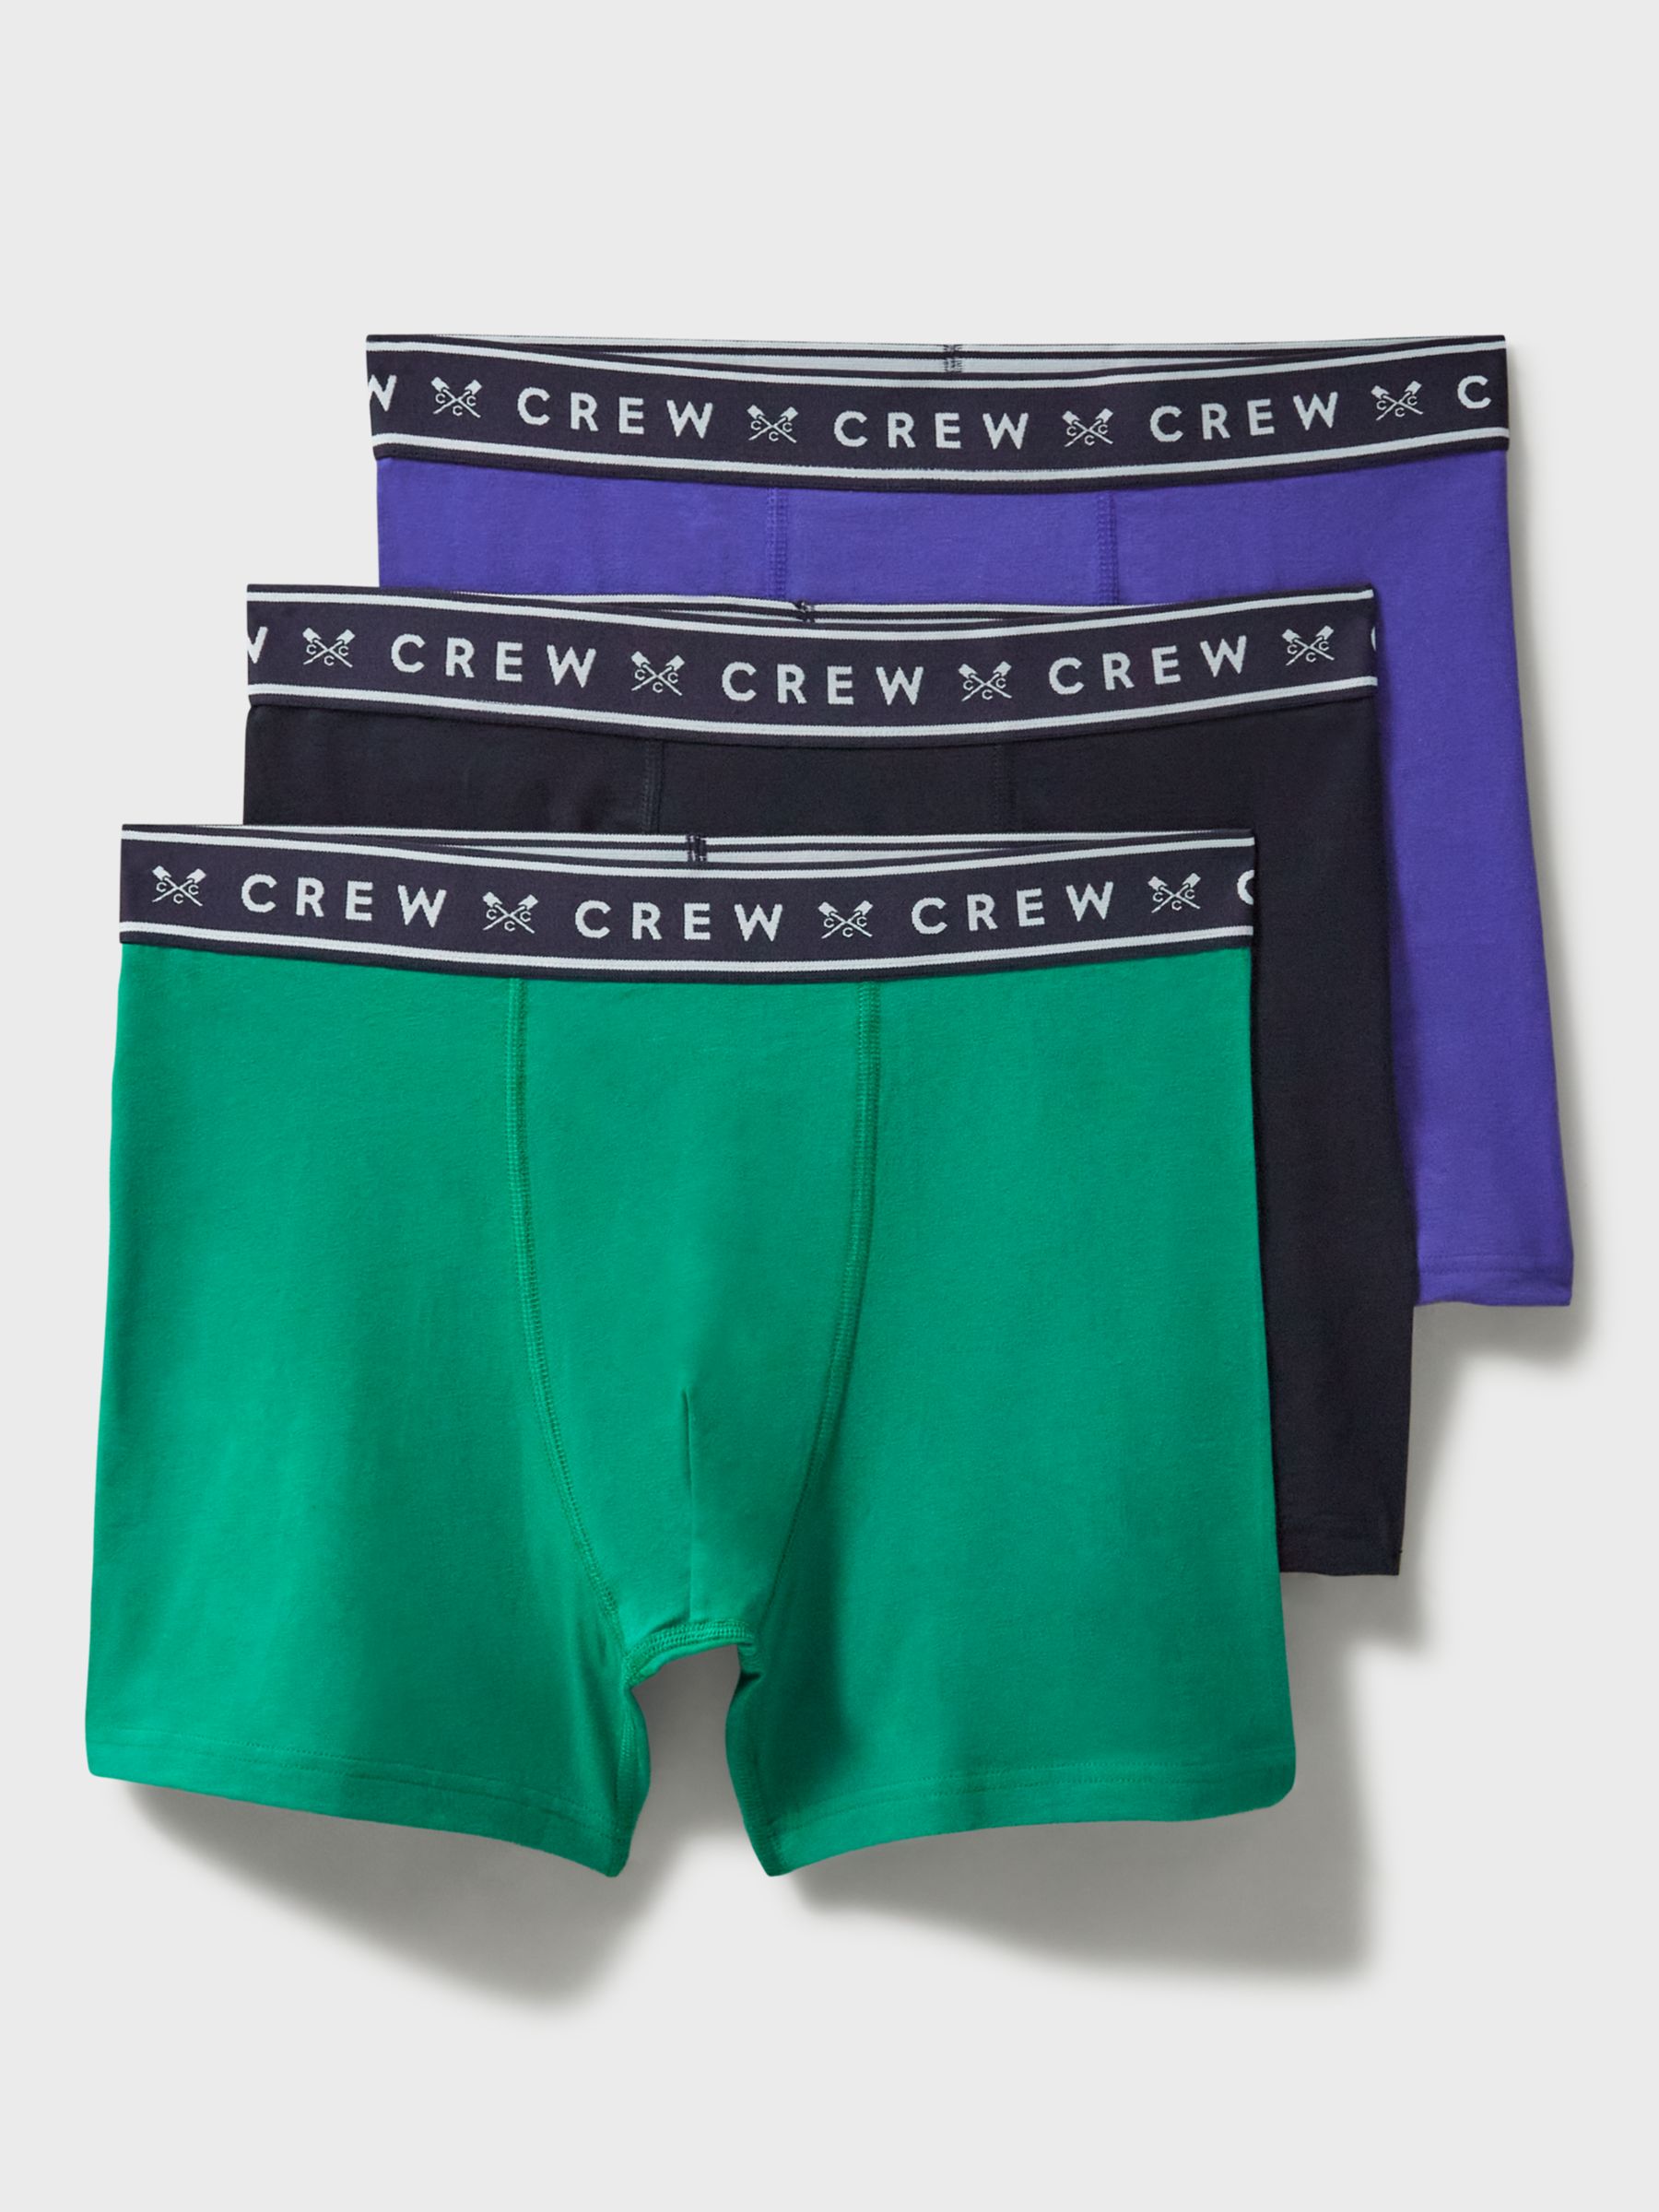 Crew Clothing Jersey Boxers, Pack of 3, Green/Navy/Blue, S